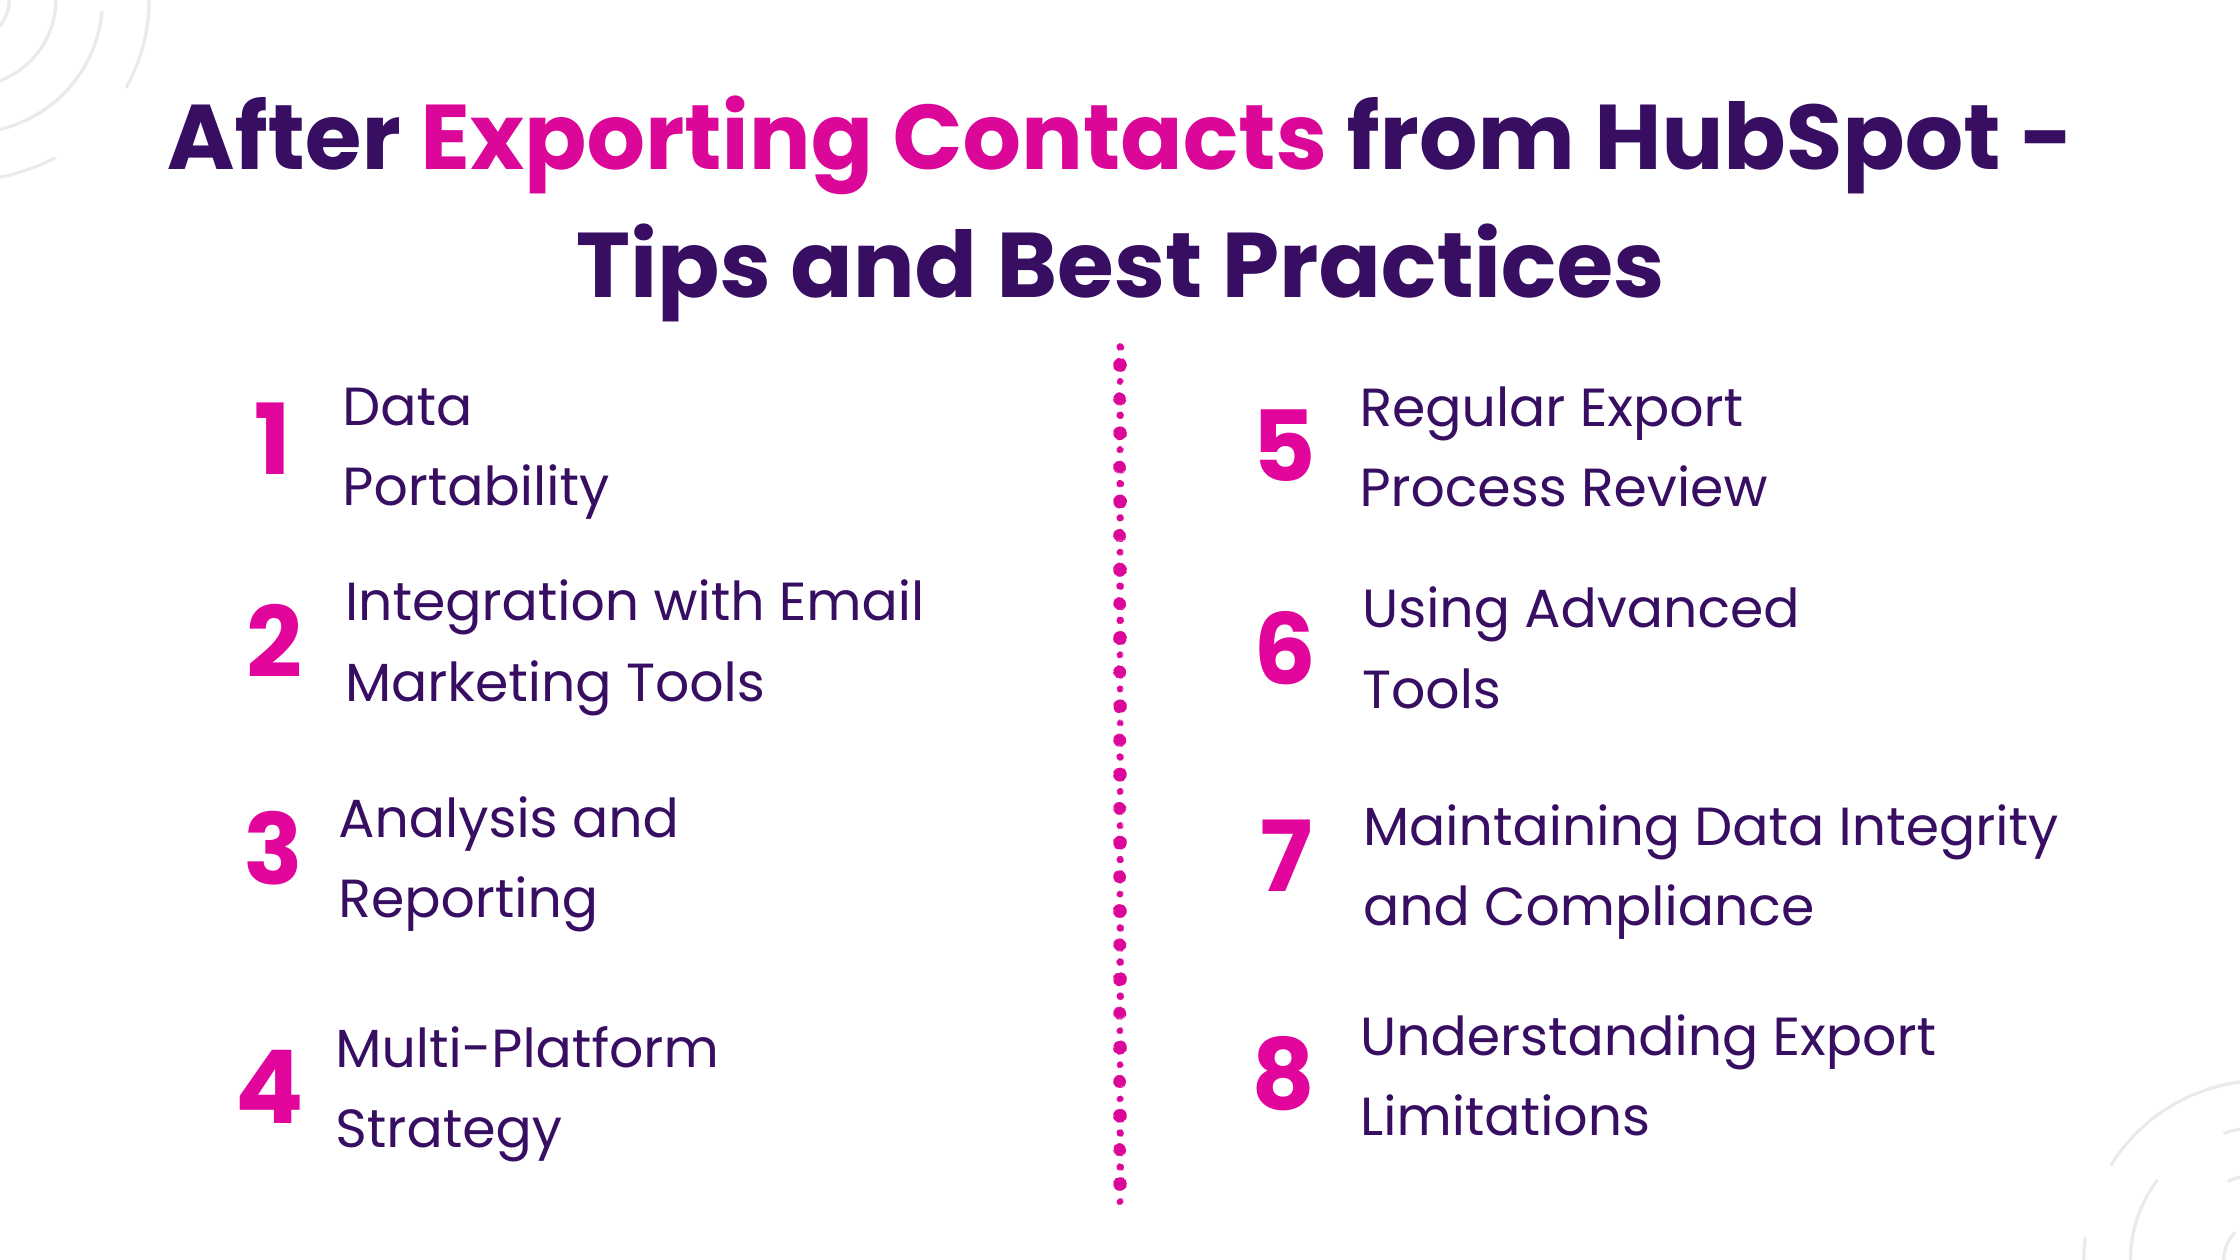 After Exporting Contacts from HubSpot - Tips and Best Practices